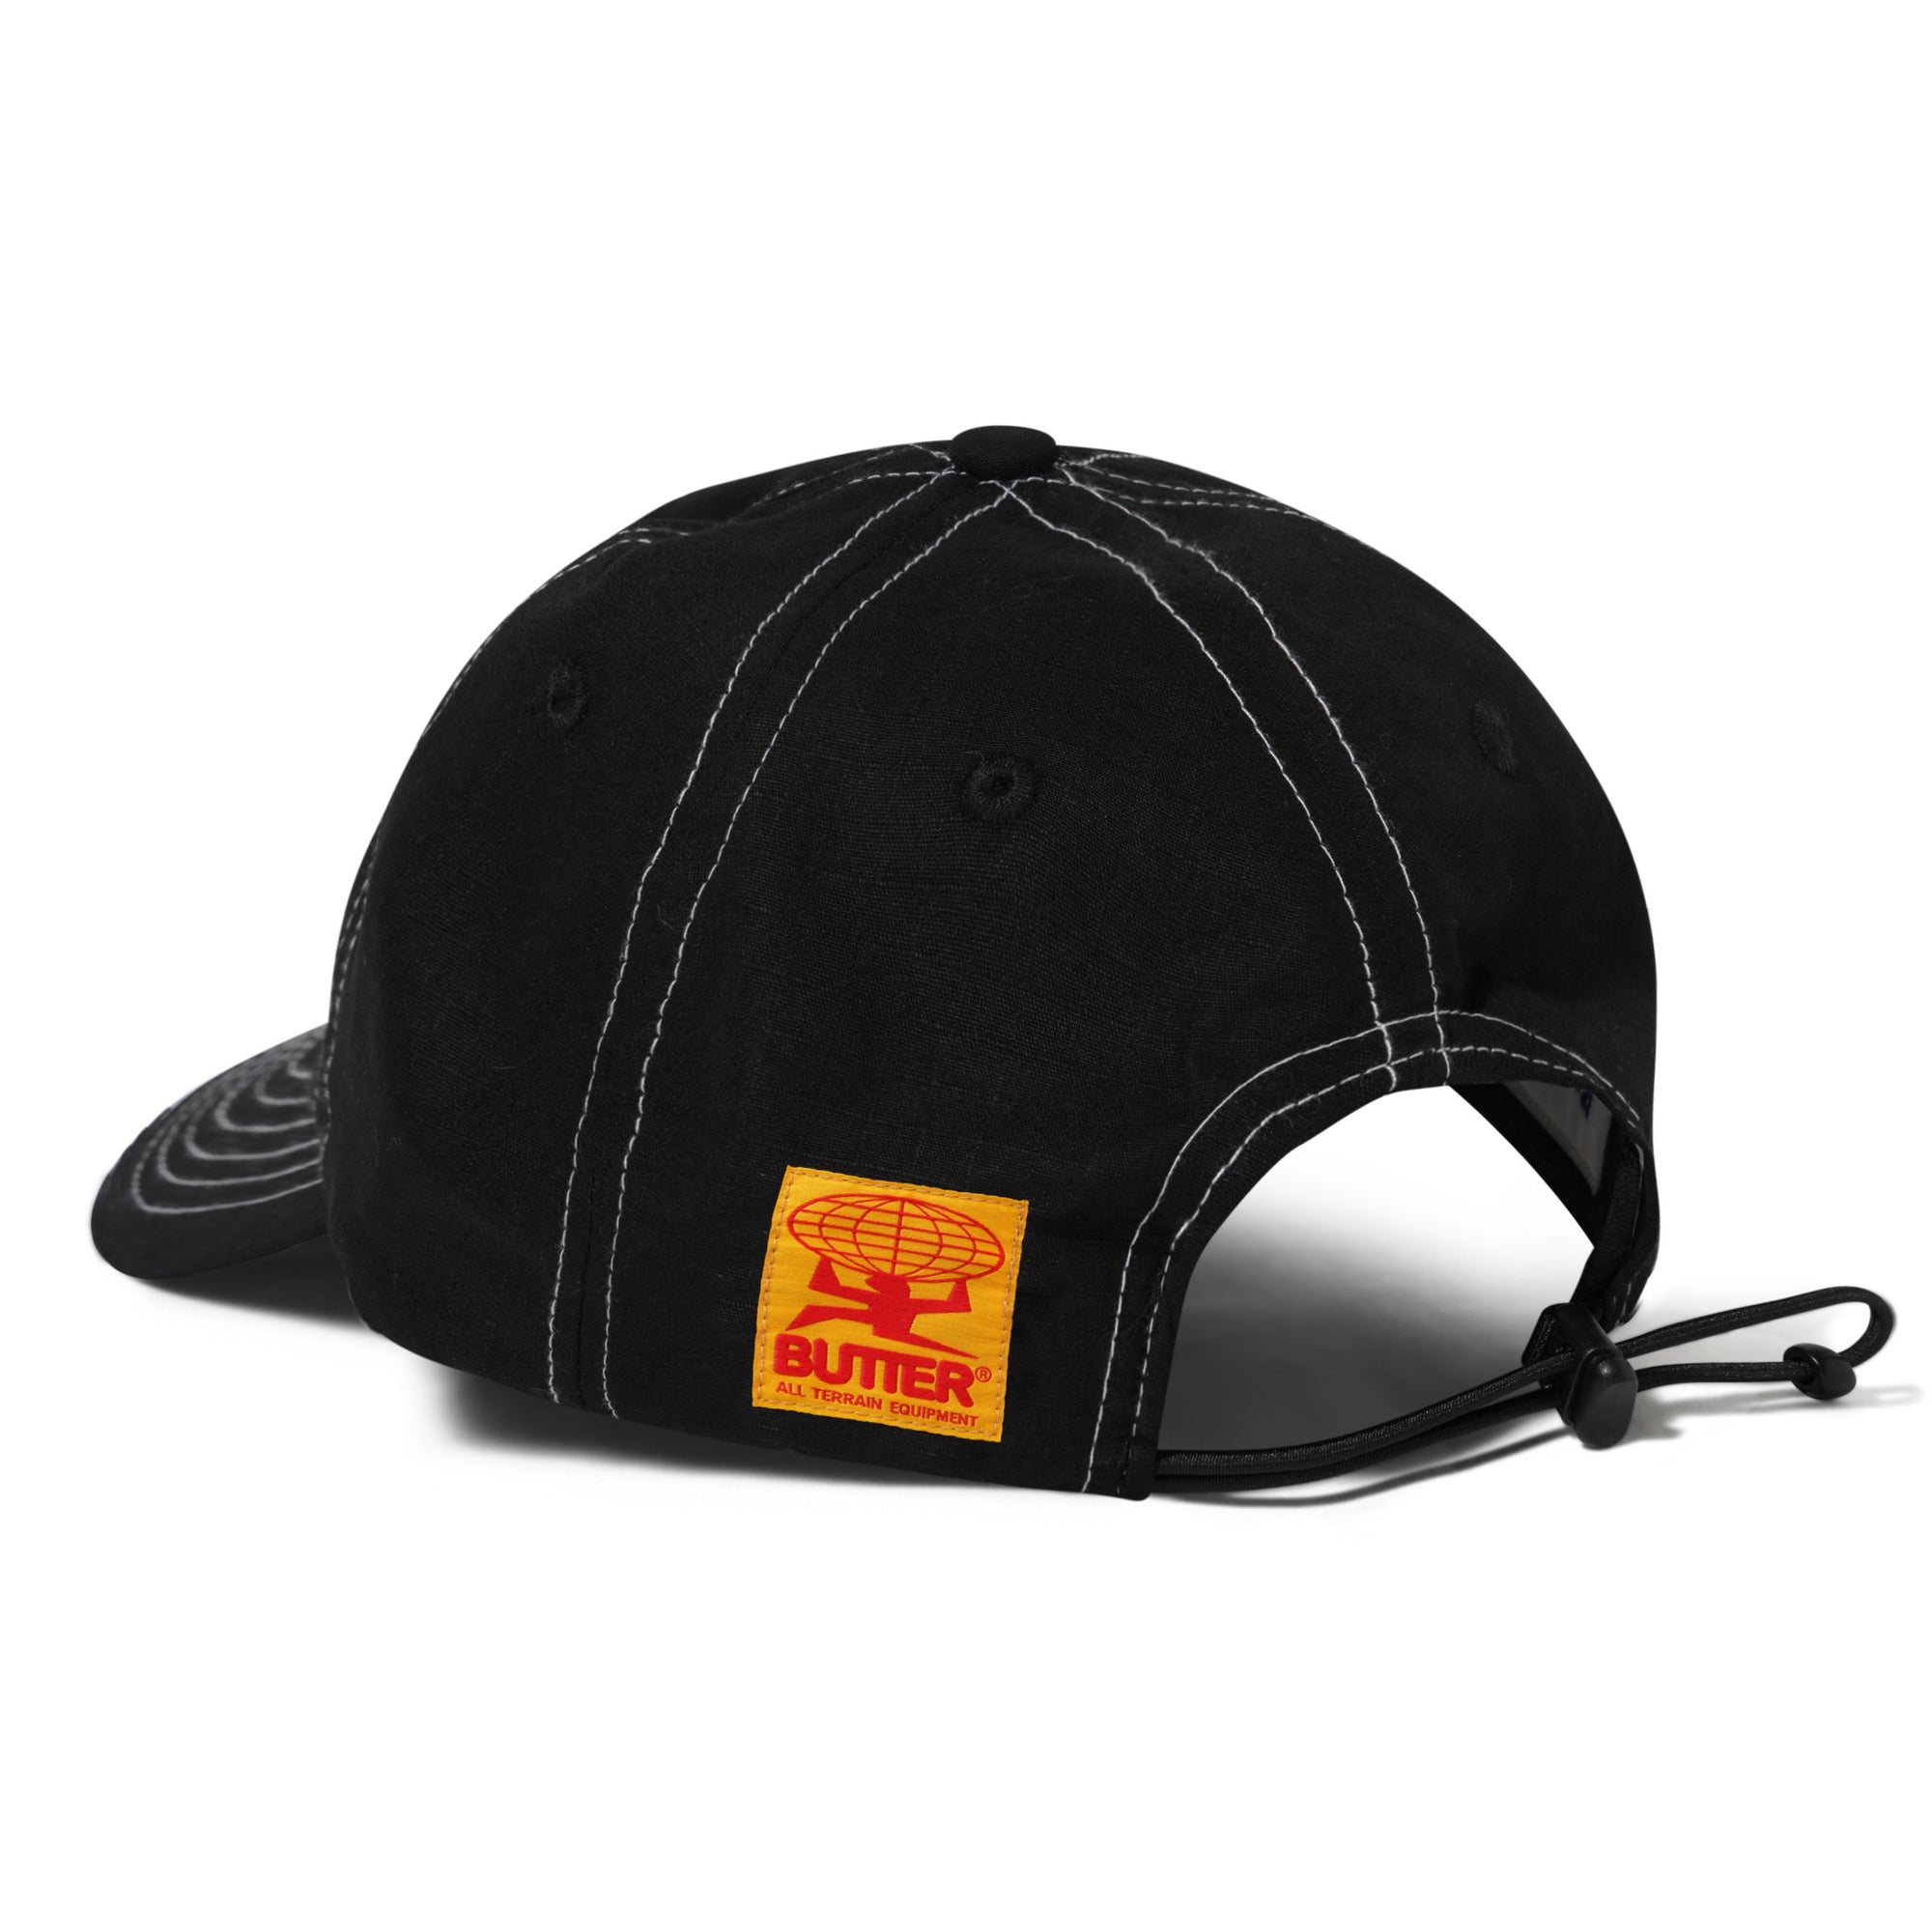 Butter Goods Washed Ripstop 6 Panel Cap Black